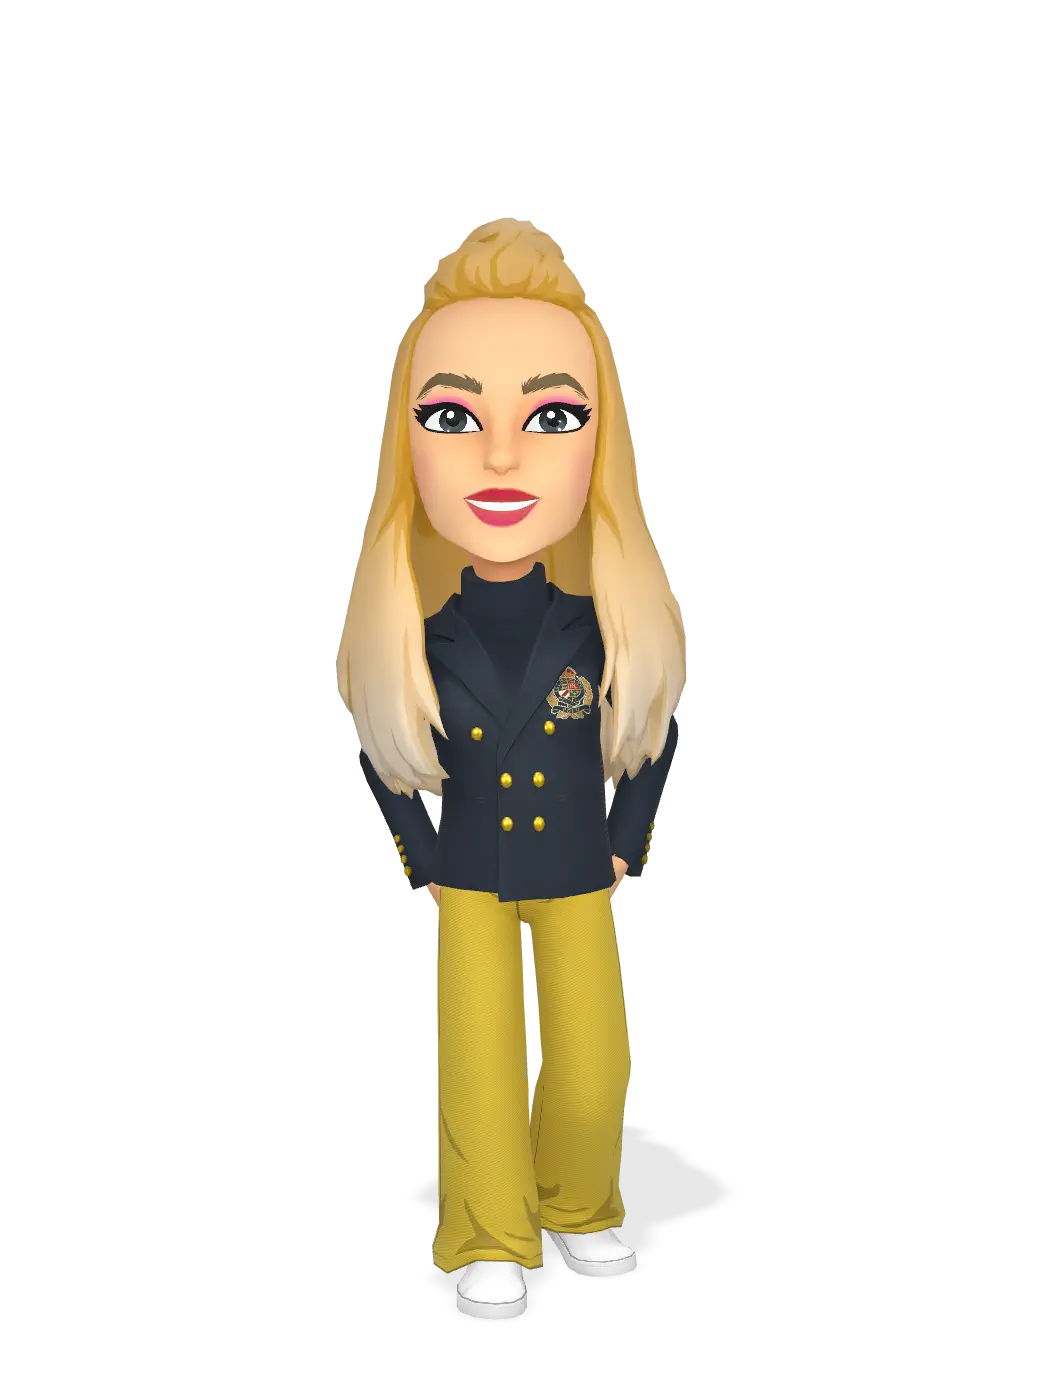 3D Bitmoji for thebeautyissue